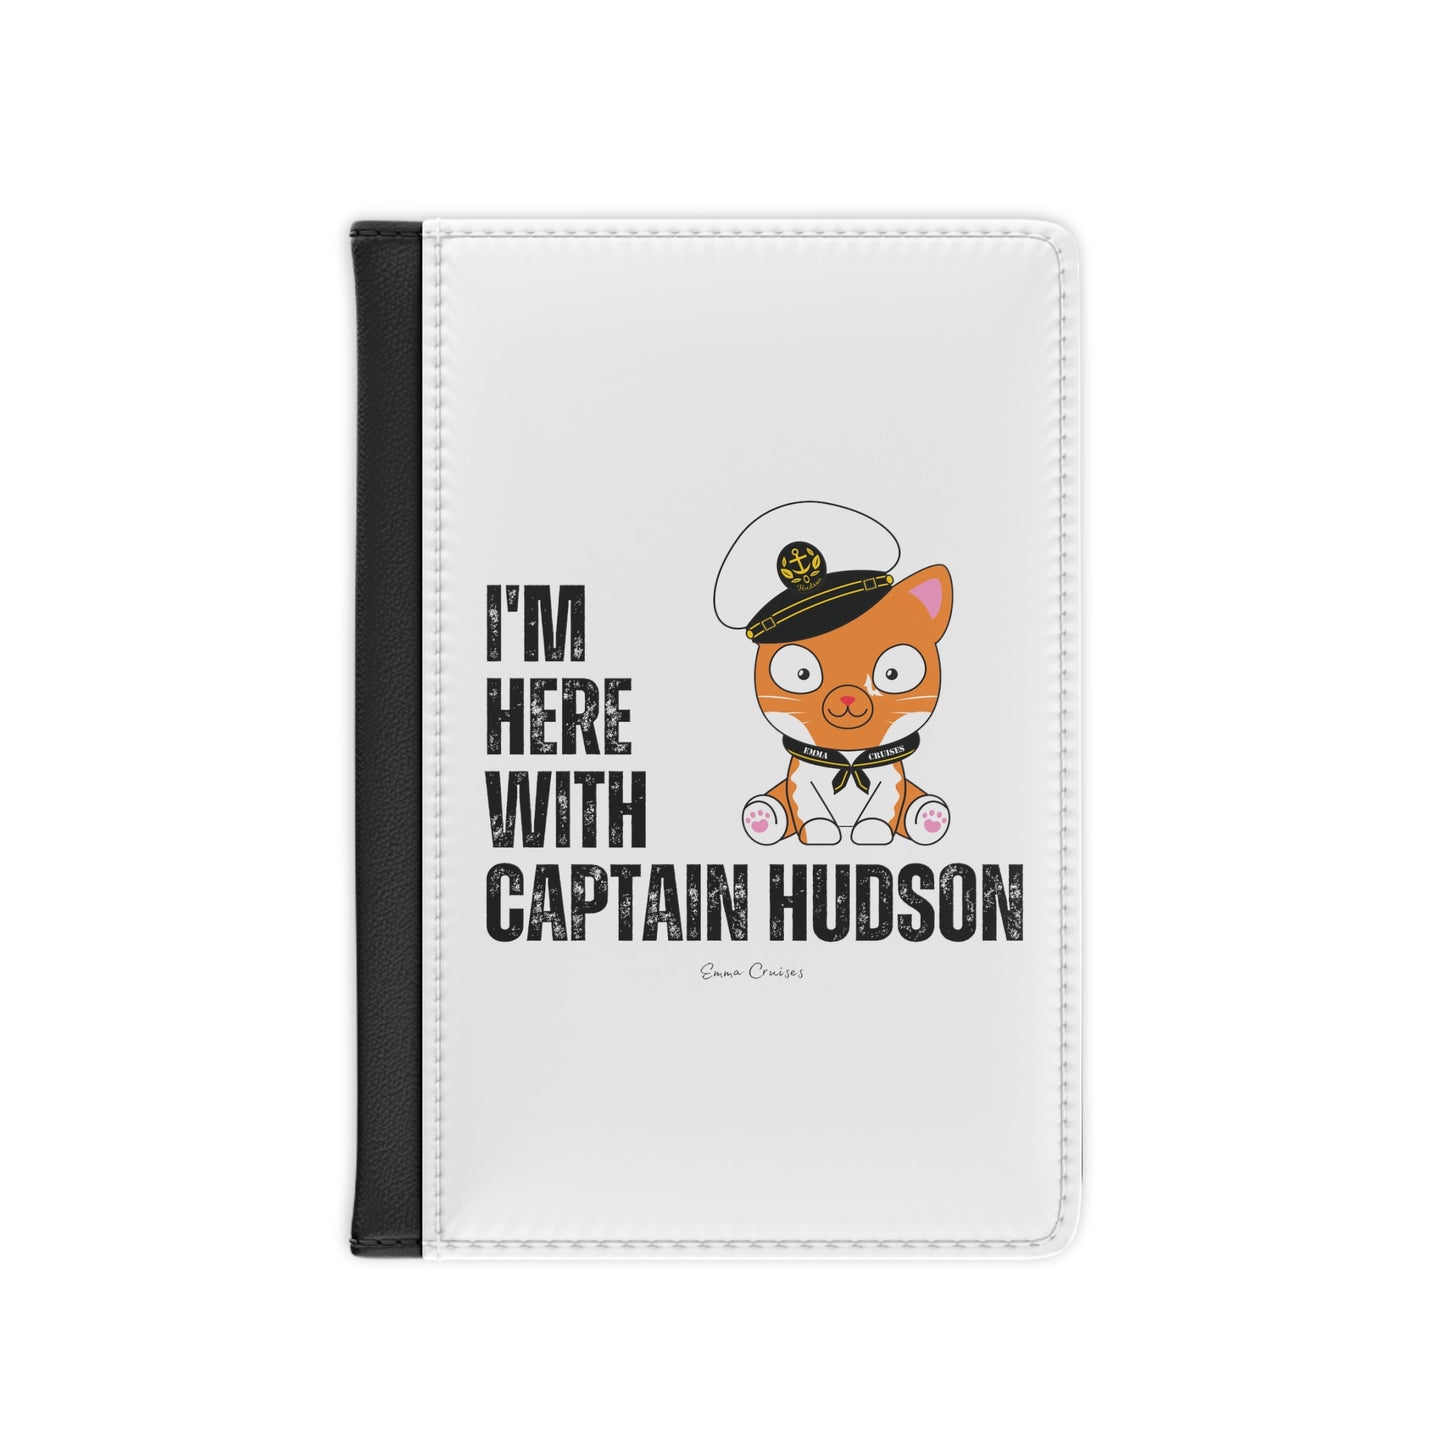 I'm With Captain Hudson - Passport Cover